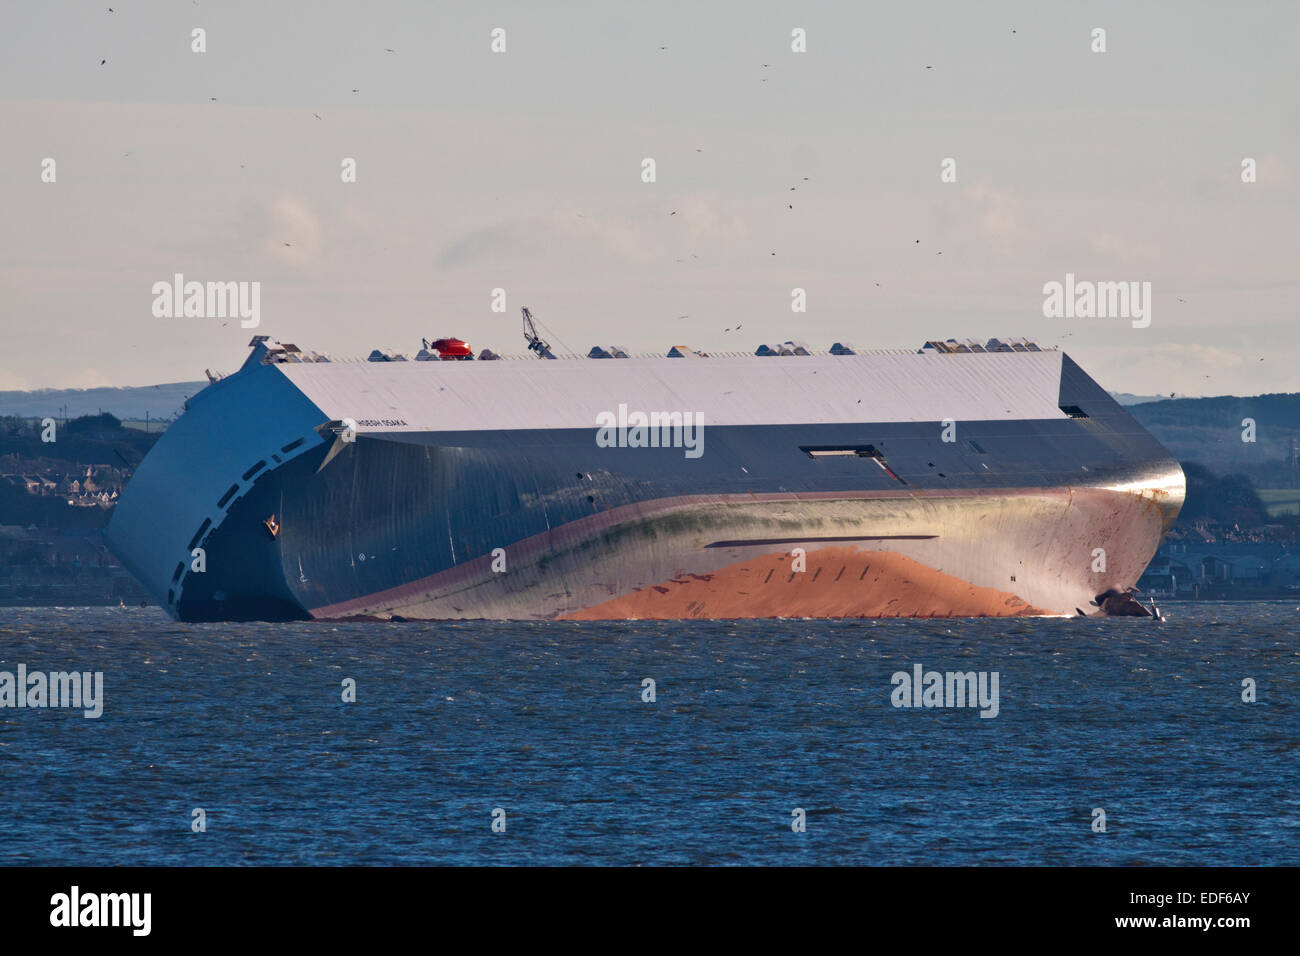 Solent, Hampshire, UK. 6th January, 2015. Hoegh Osaka Car Transporter Ship run aground in the Solent, Hampshire, England - awaiting salvage plans - 06Jan15 Credit:  Krys Bailey/Alamy Live News Stock Photo